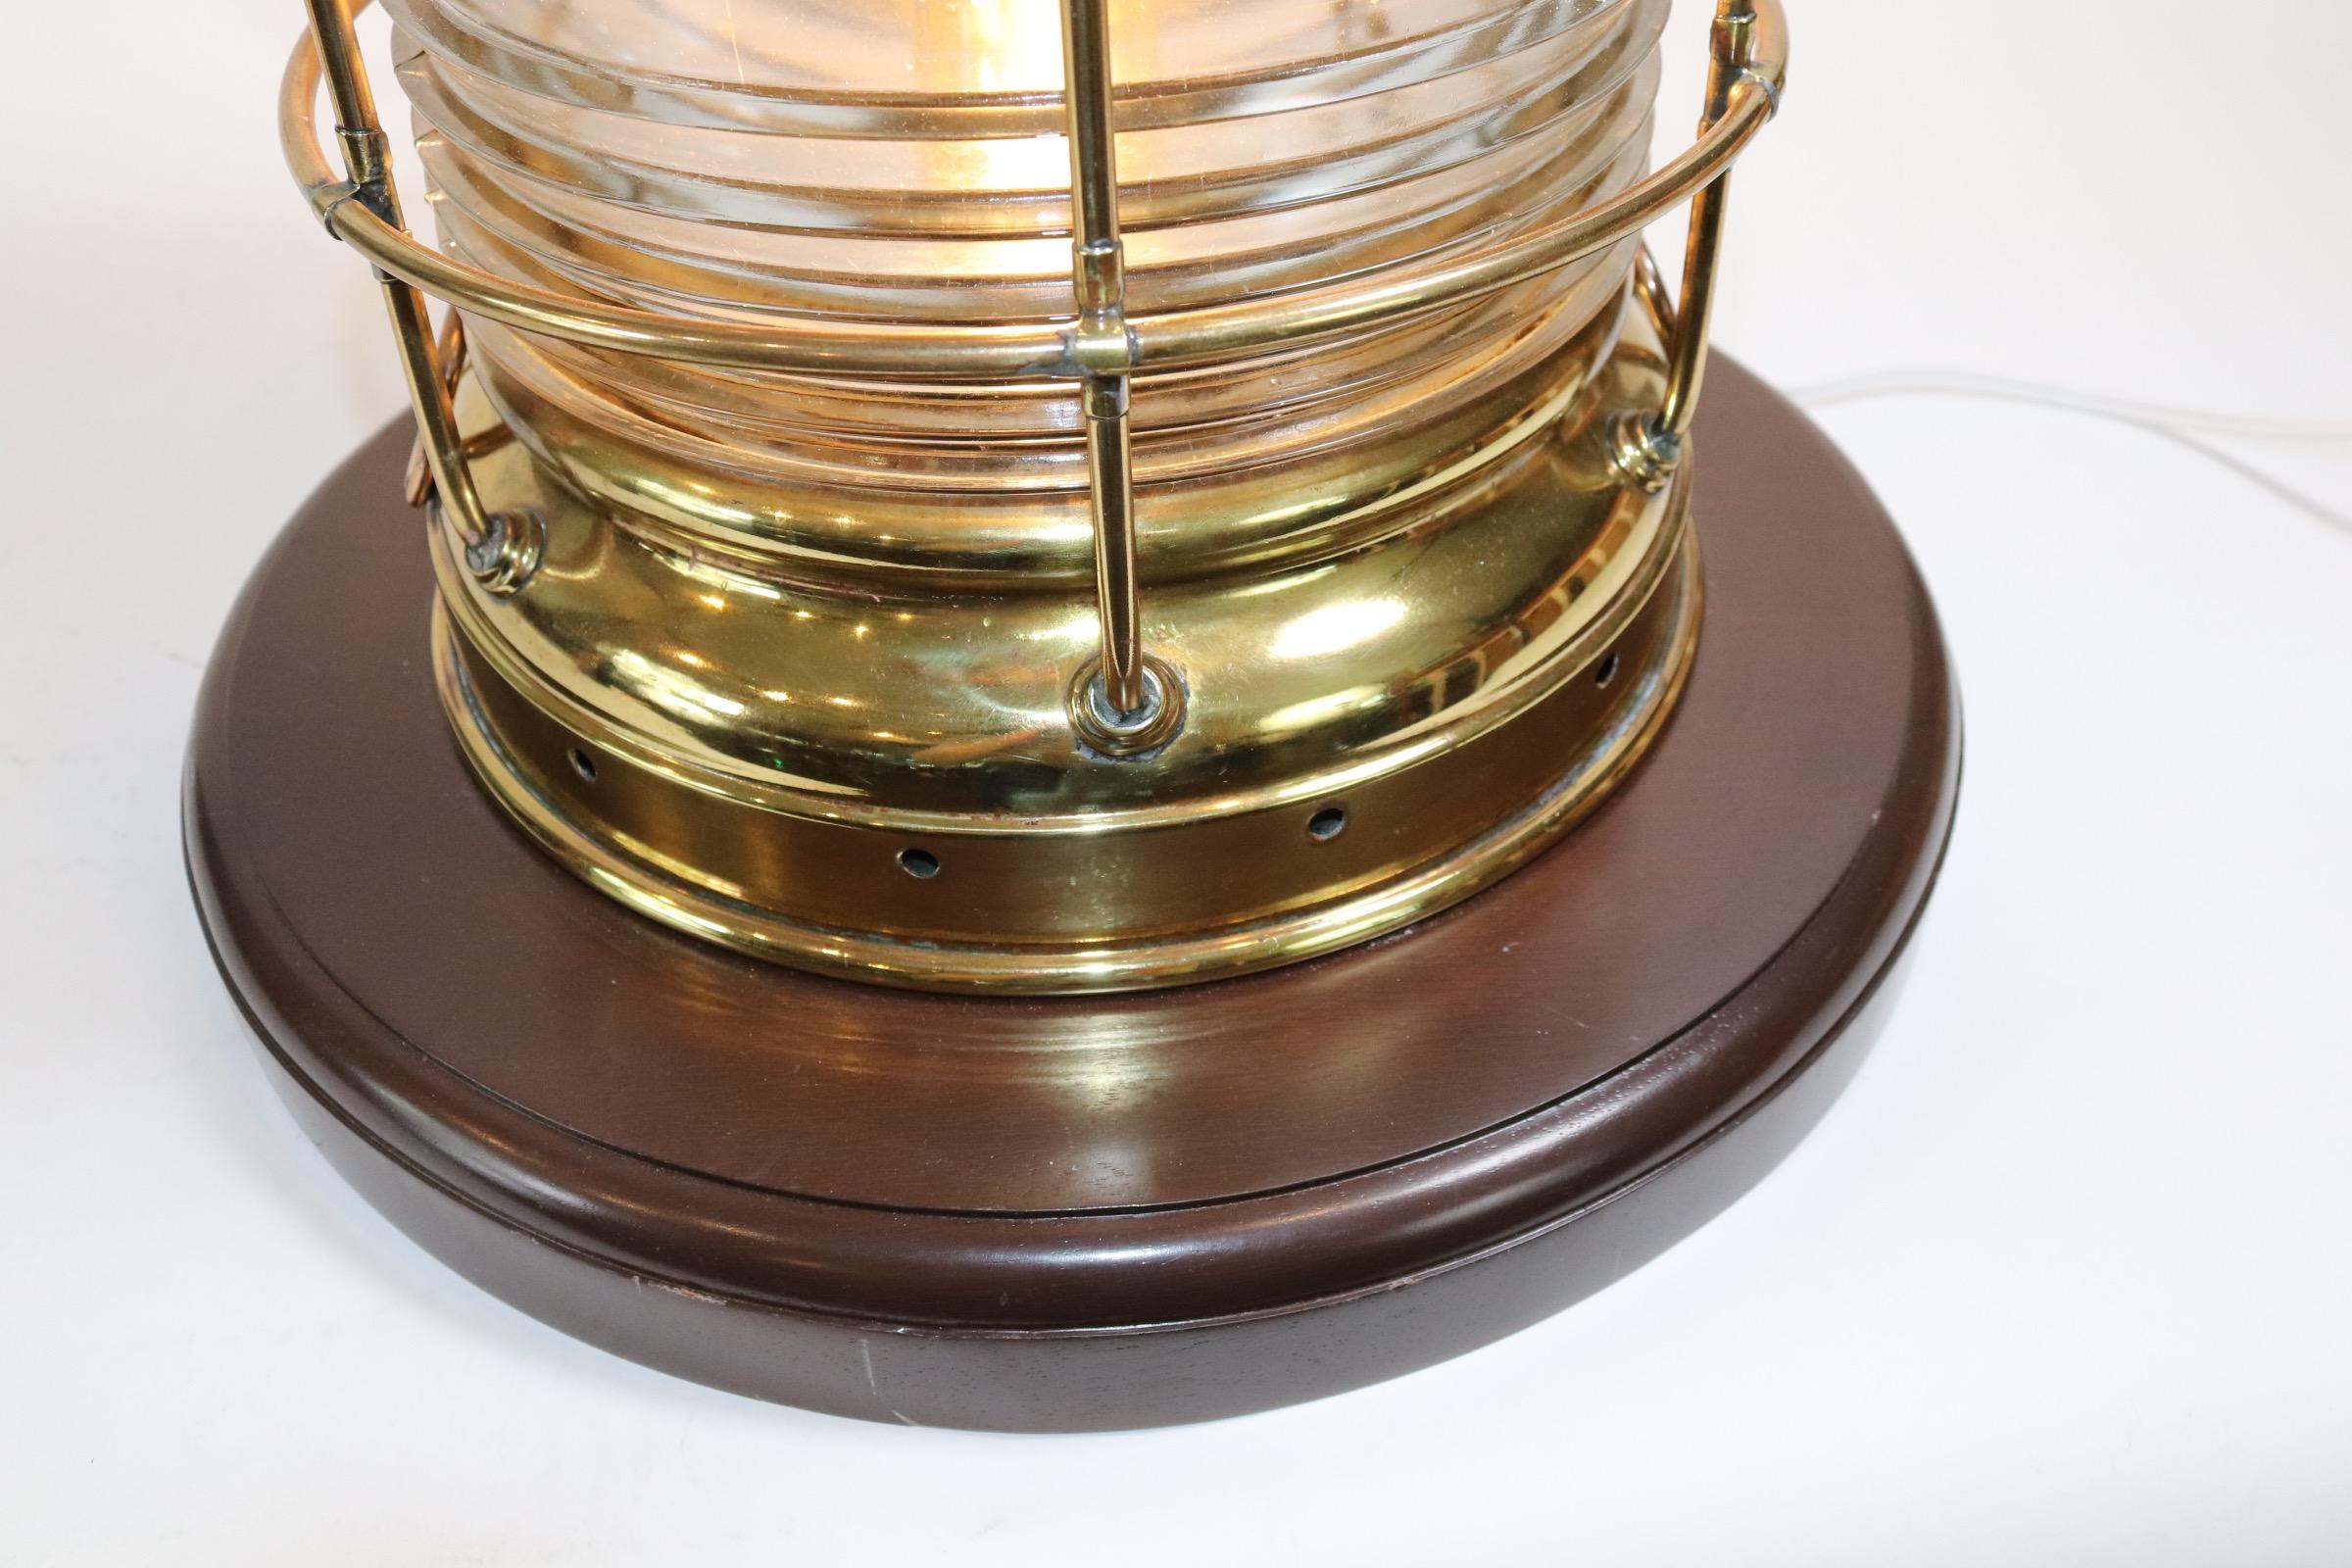 High quality highly polished and lacquered ships anchor lantern by Perko of Brooklyn New York. The thick Fresnel glass lens is mounted into the housing and surrounded by a protective brass cage. The lantern is mounted onto a thick wood base with